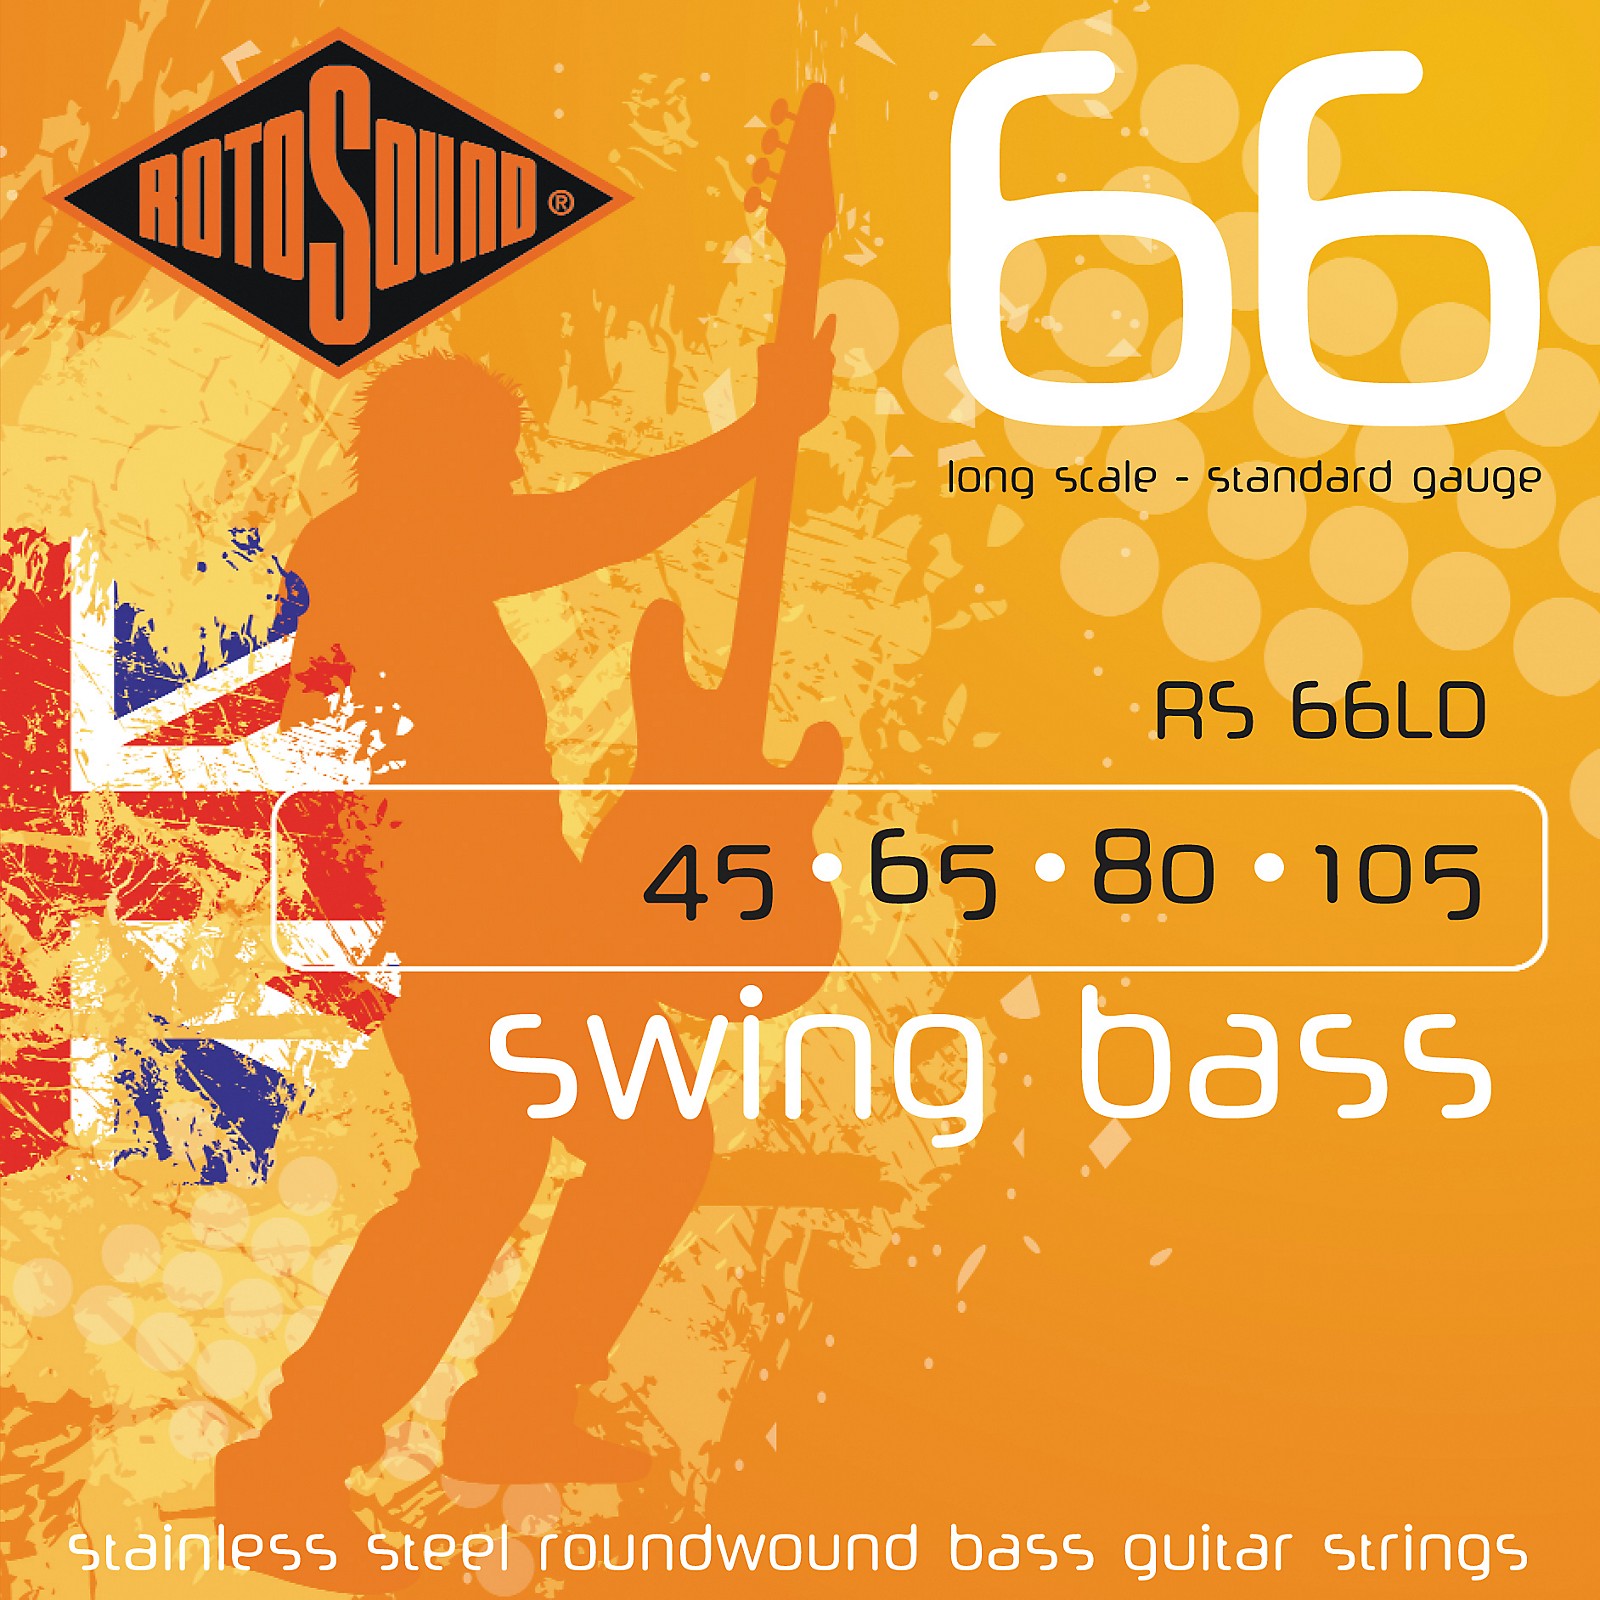 Rotosound RS66LD Long Scale Swing 66 Bass Strings | Guitar Center